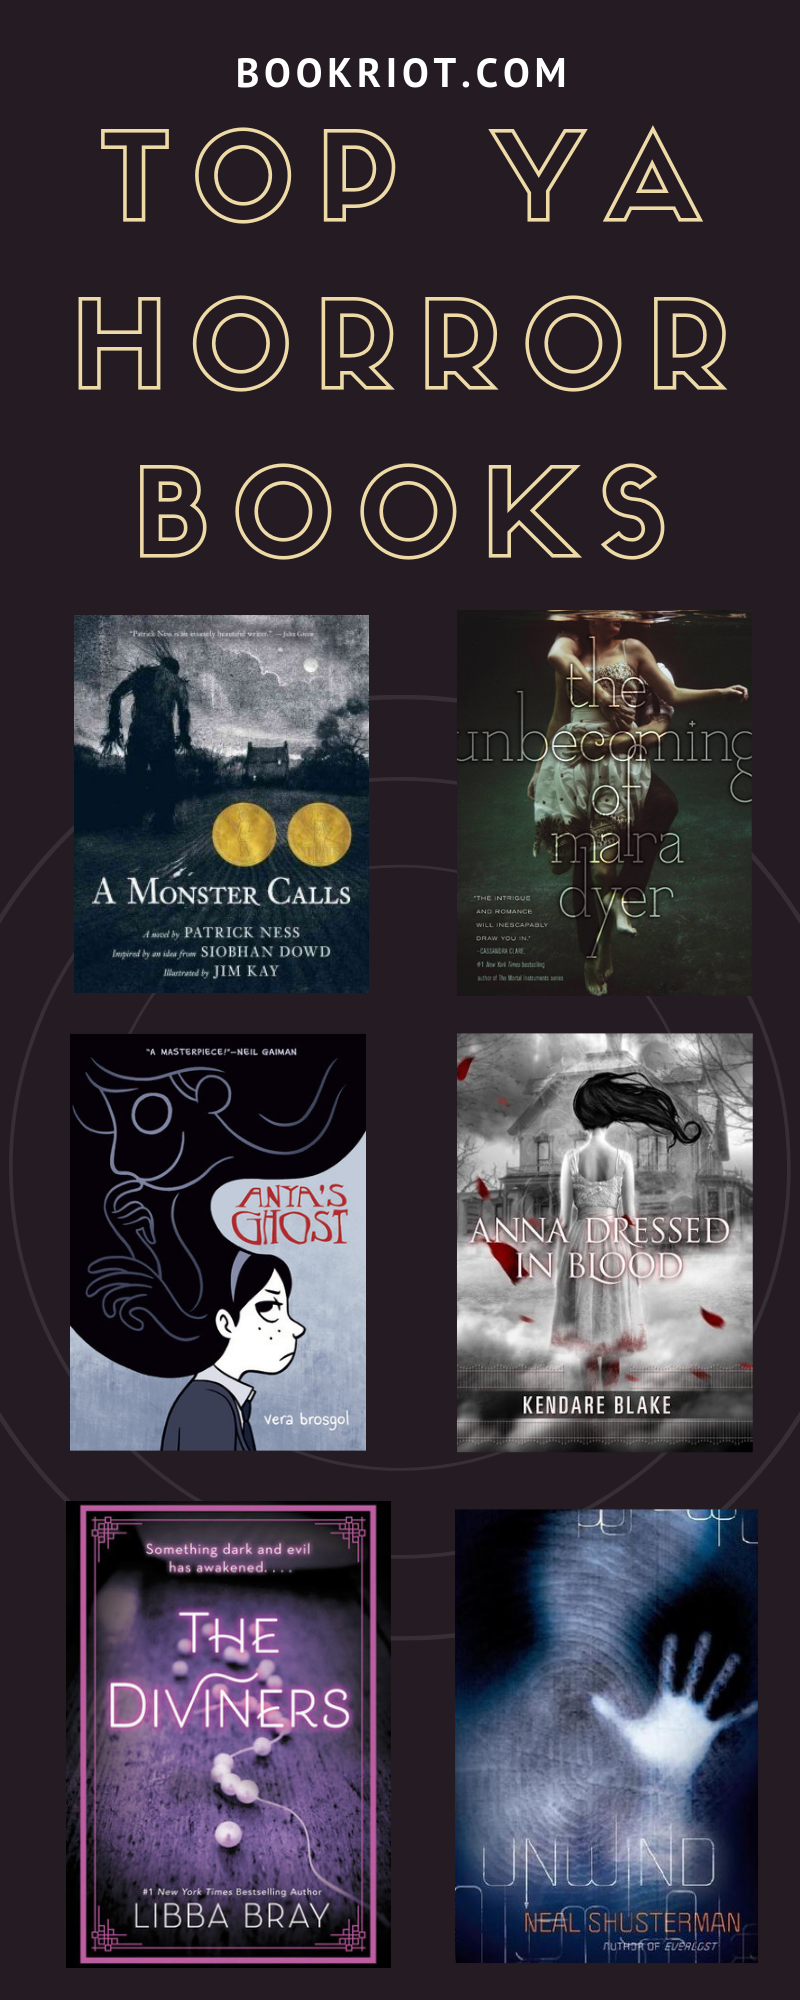 These are the top YA horror books according to Goodreads users. horror books | scary books | ya books | ya horror books | YA book lists | book lists | goodreads lists | top horror books | top ya horror | top books on goodreads | popular books on goodreads